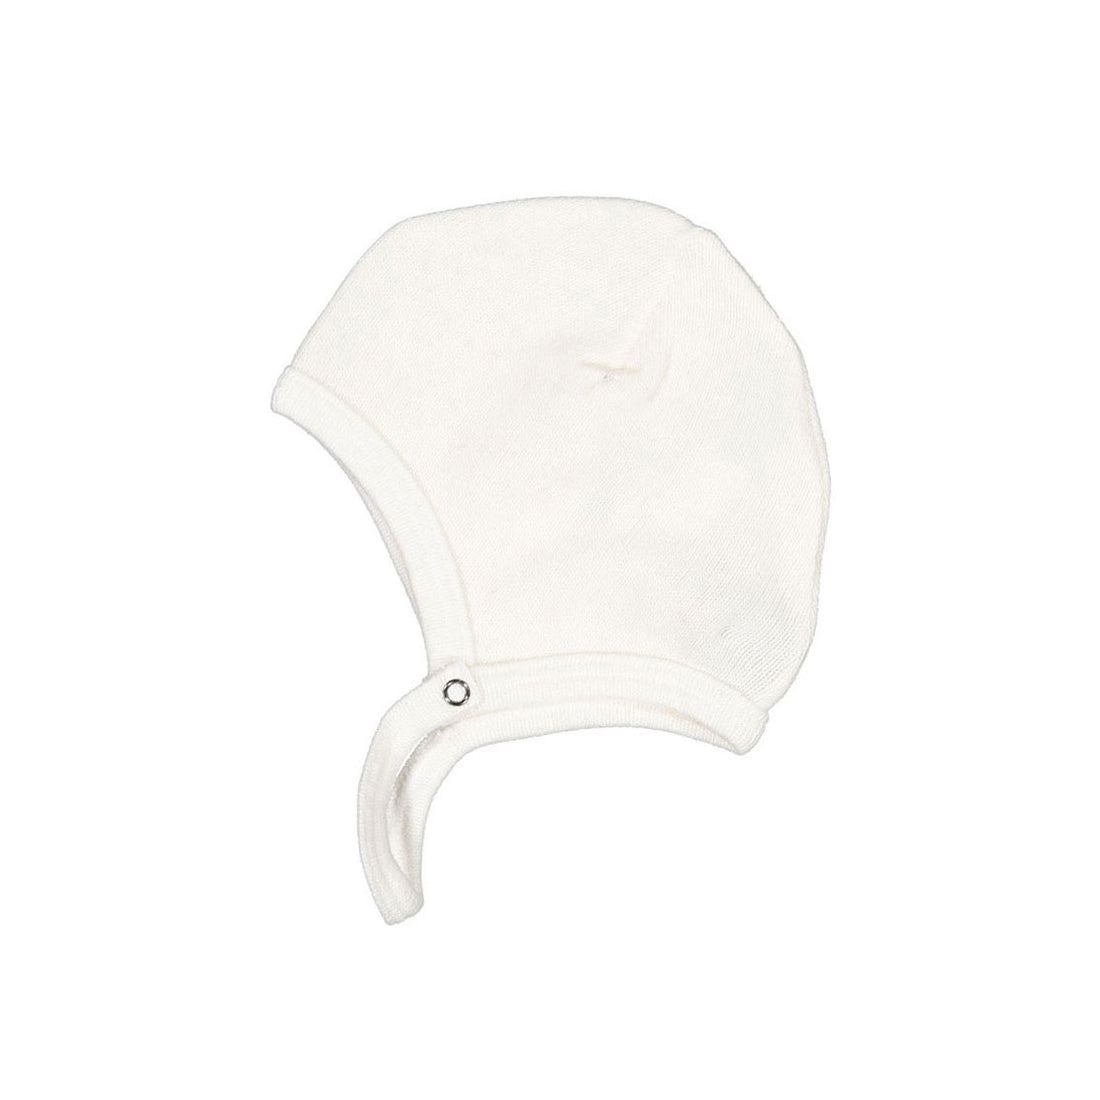 Pequeno TOCON Natural Soft Baby Bonnet